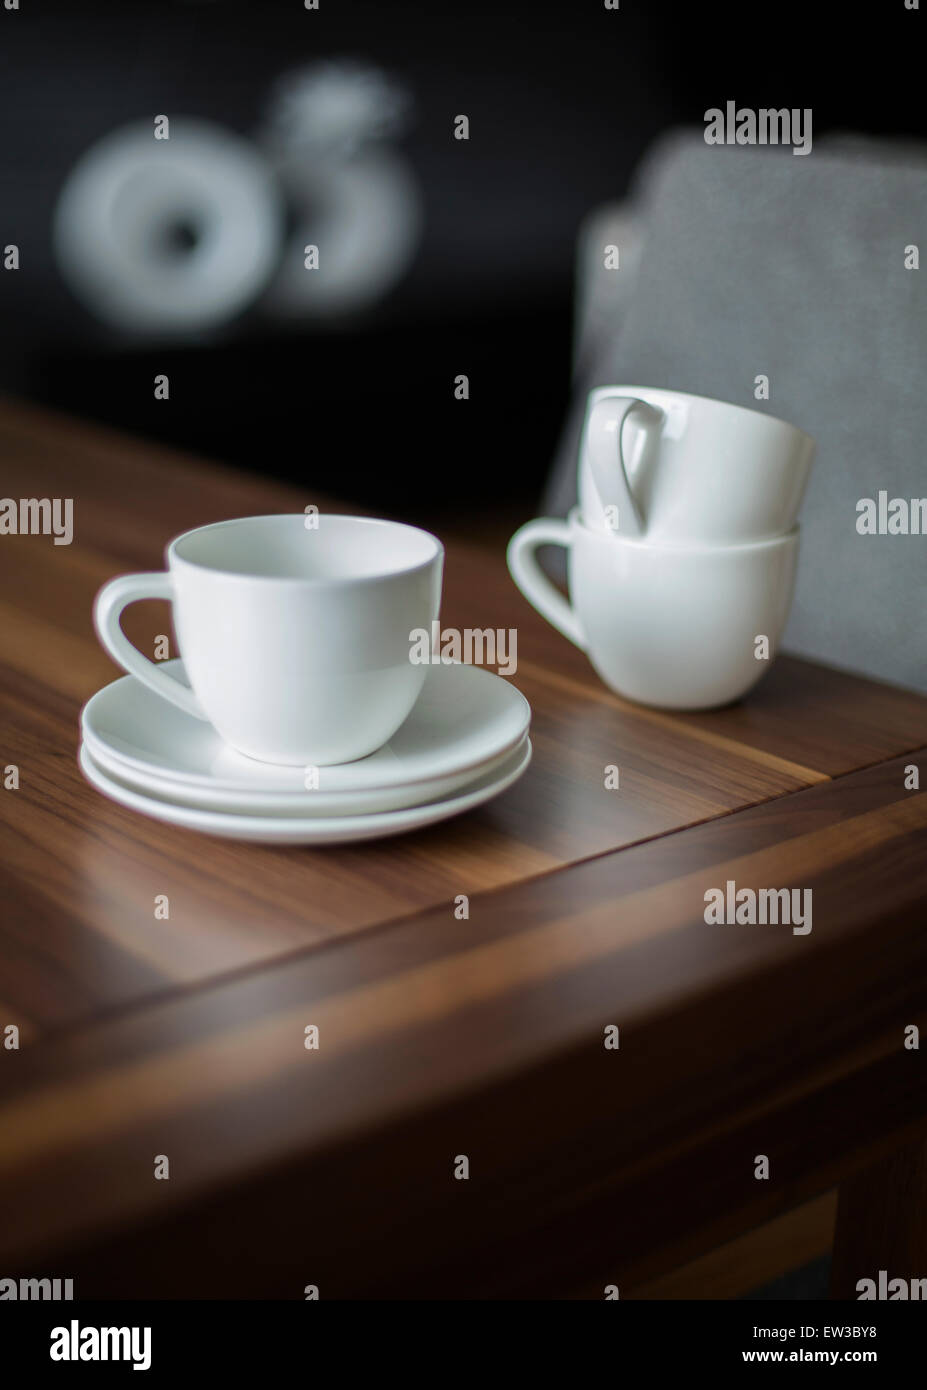 closeup of white porcelain cups on a wooden table Stock Photo